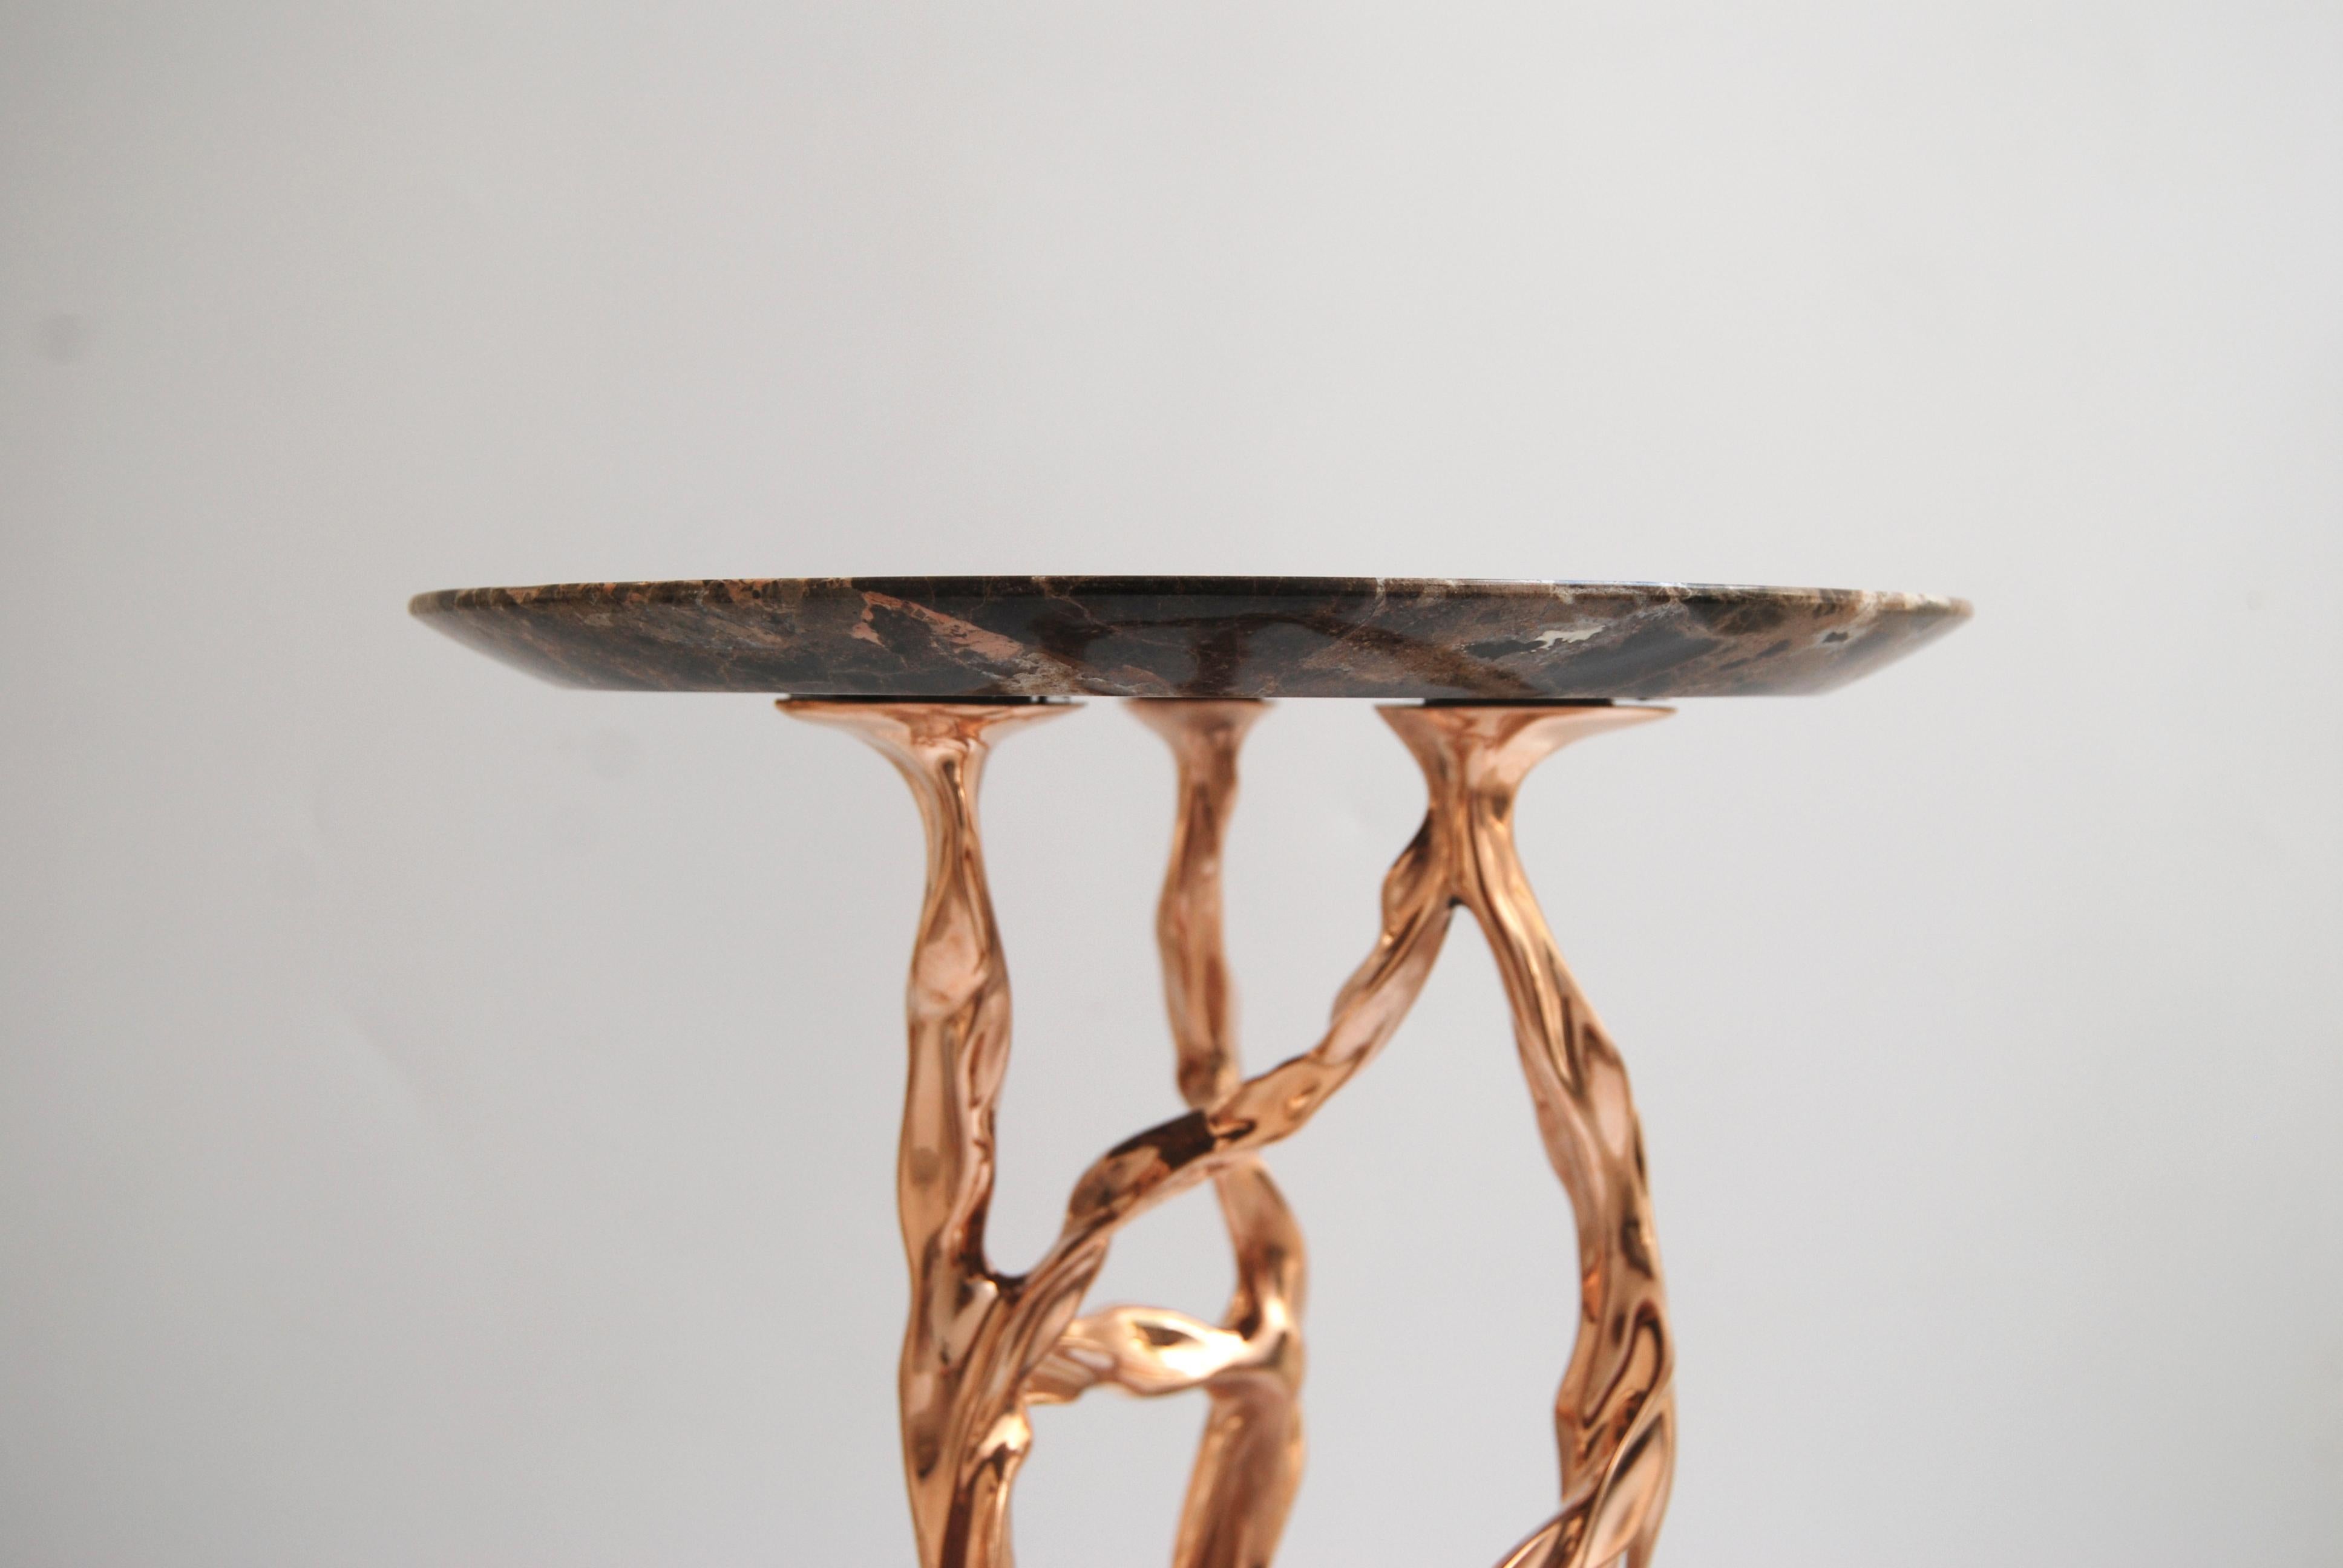 Pair of polished bronze side tables with marquina marble top by Fakasaka Design
Dimensions: W 28 x D 28 x H 62 cm
Materials: polished bronze, nero marquina marble top.

